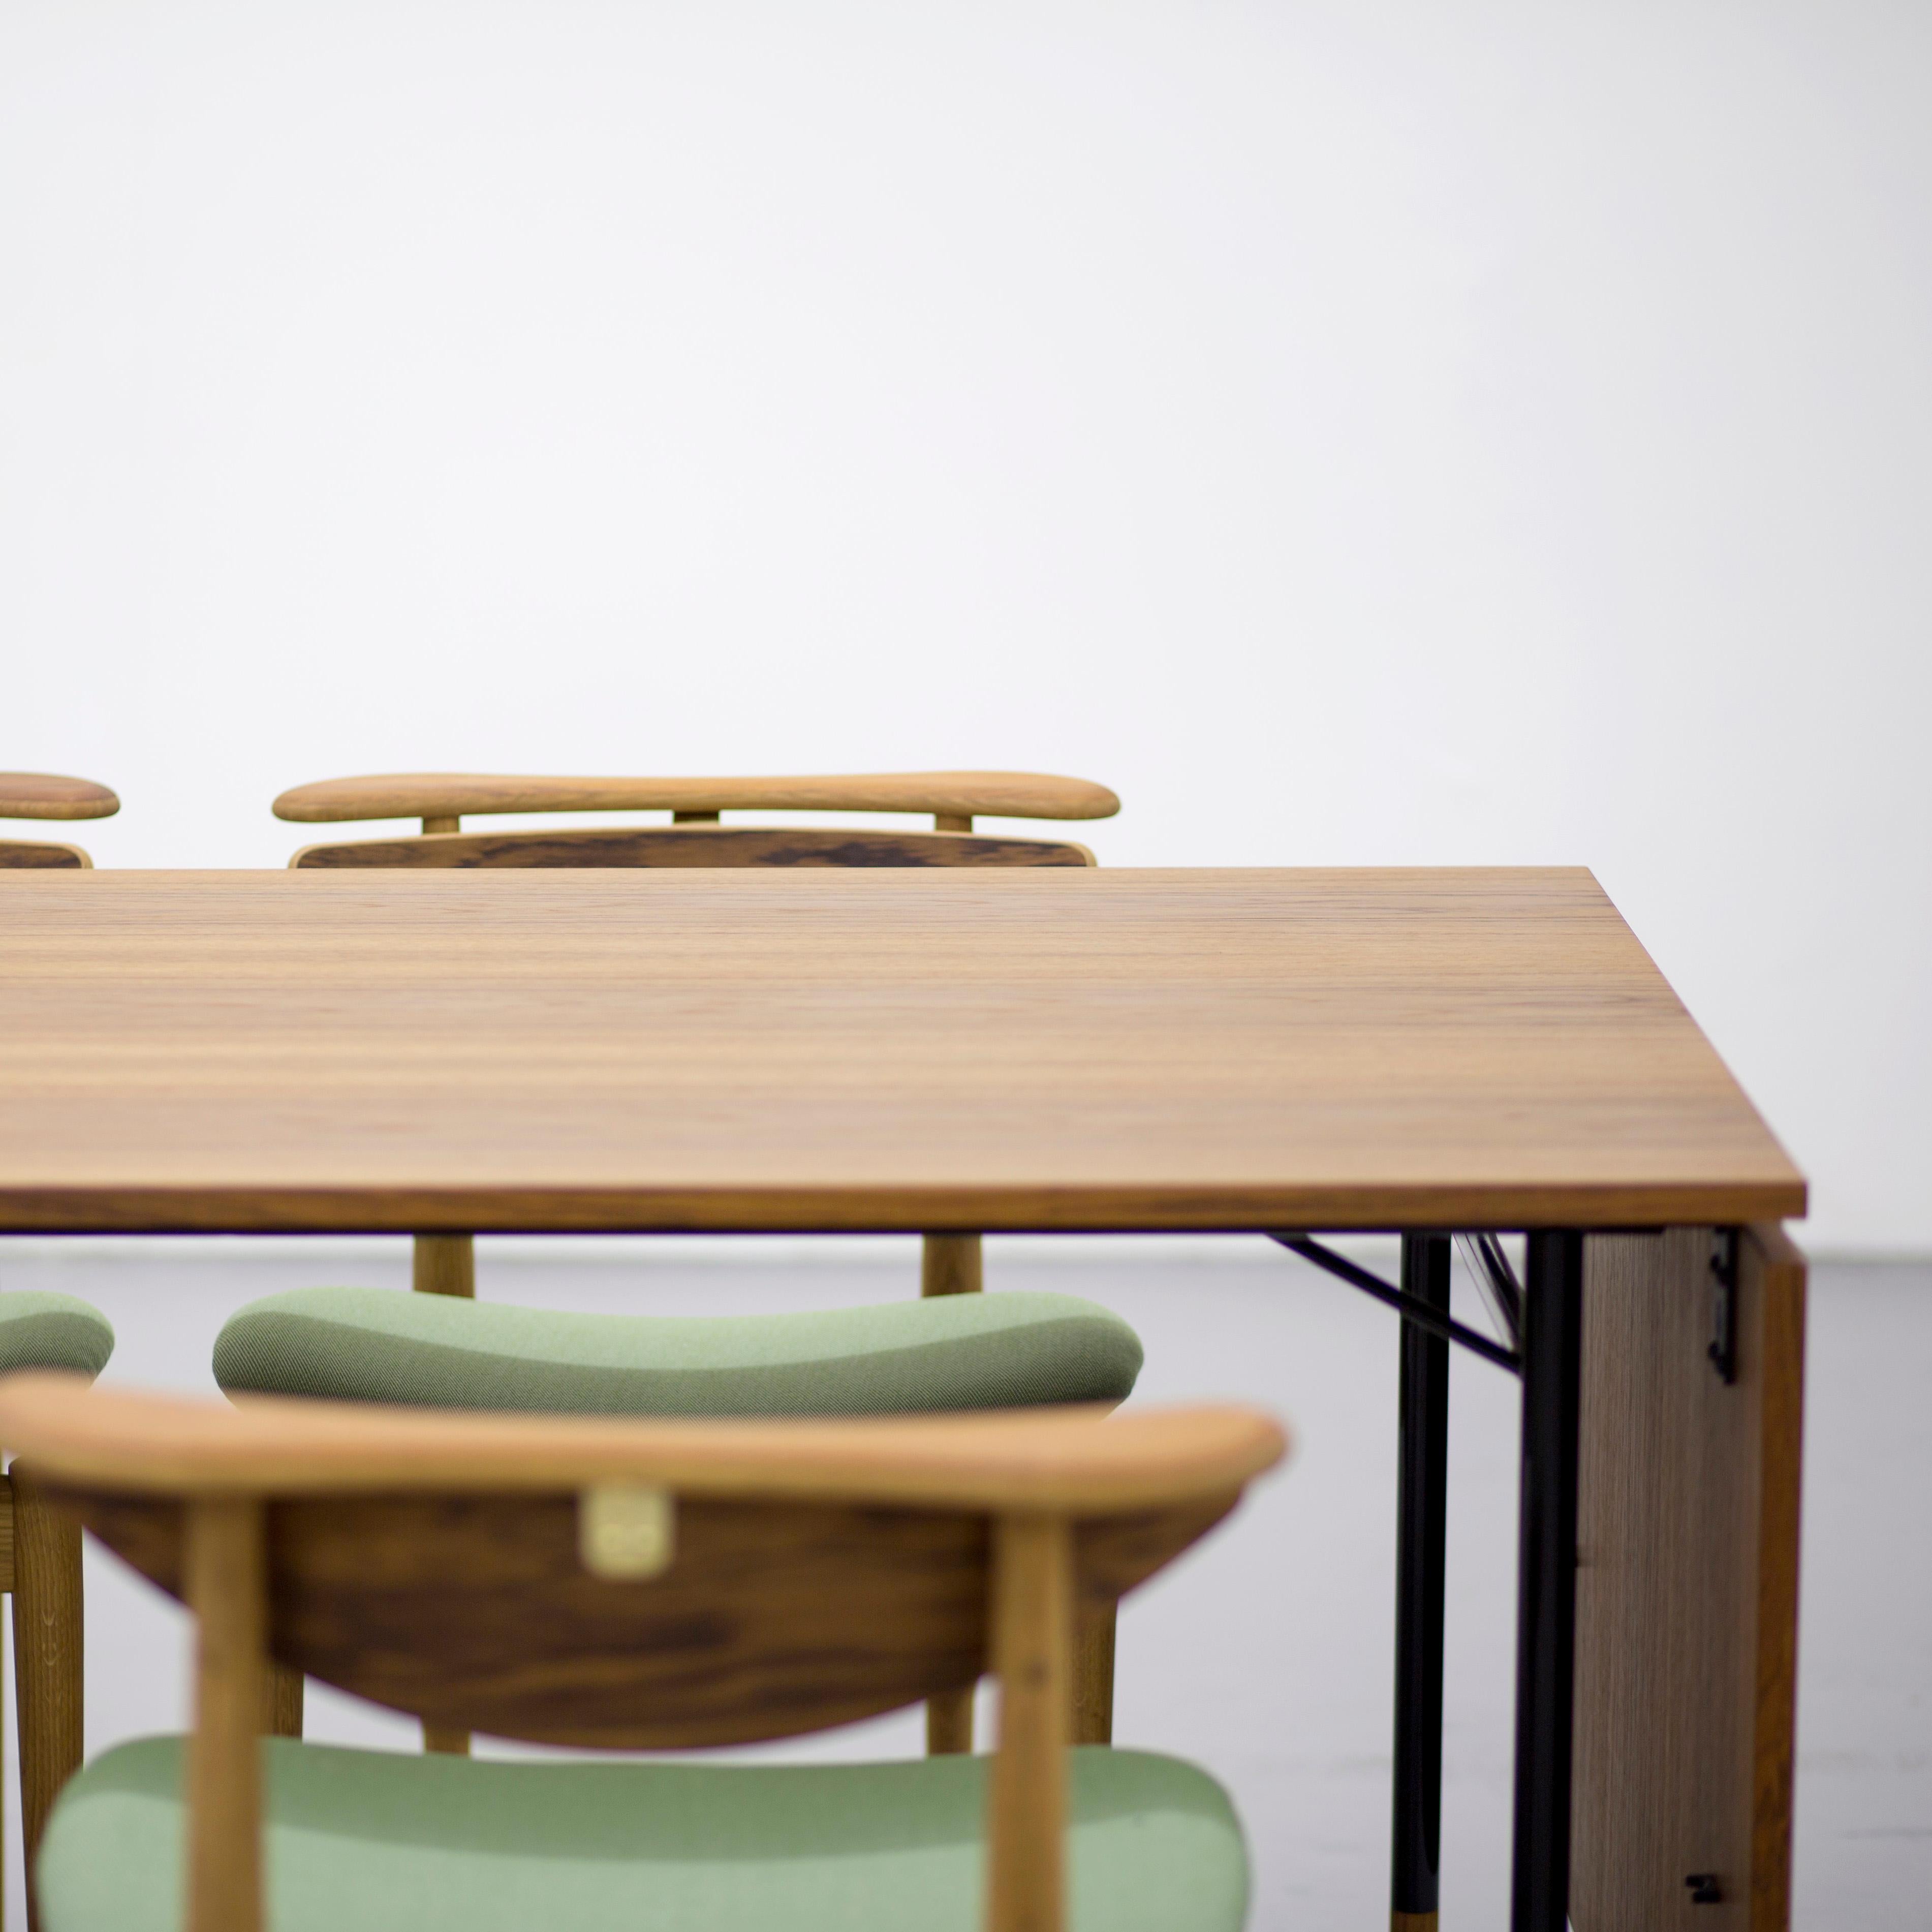 Finn Juhl Nyhavn Dining Table with Two Drop Leaves, Lino and Wood 6